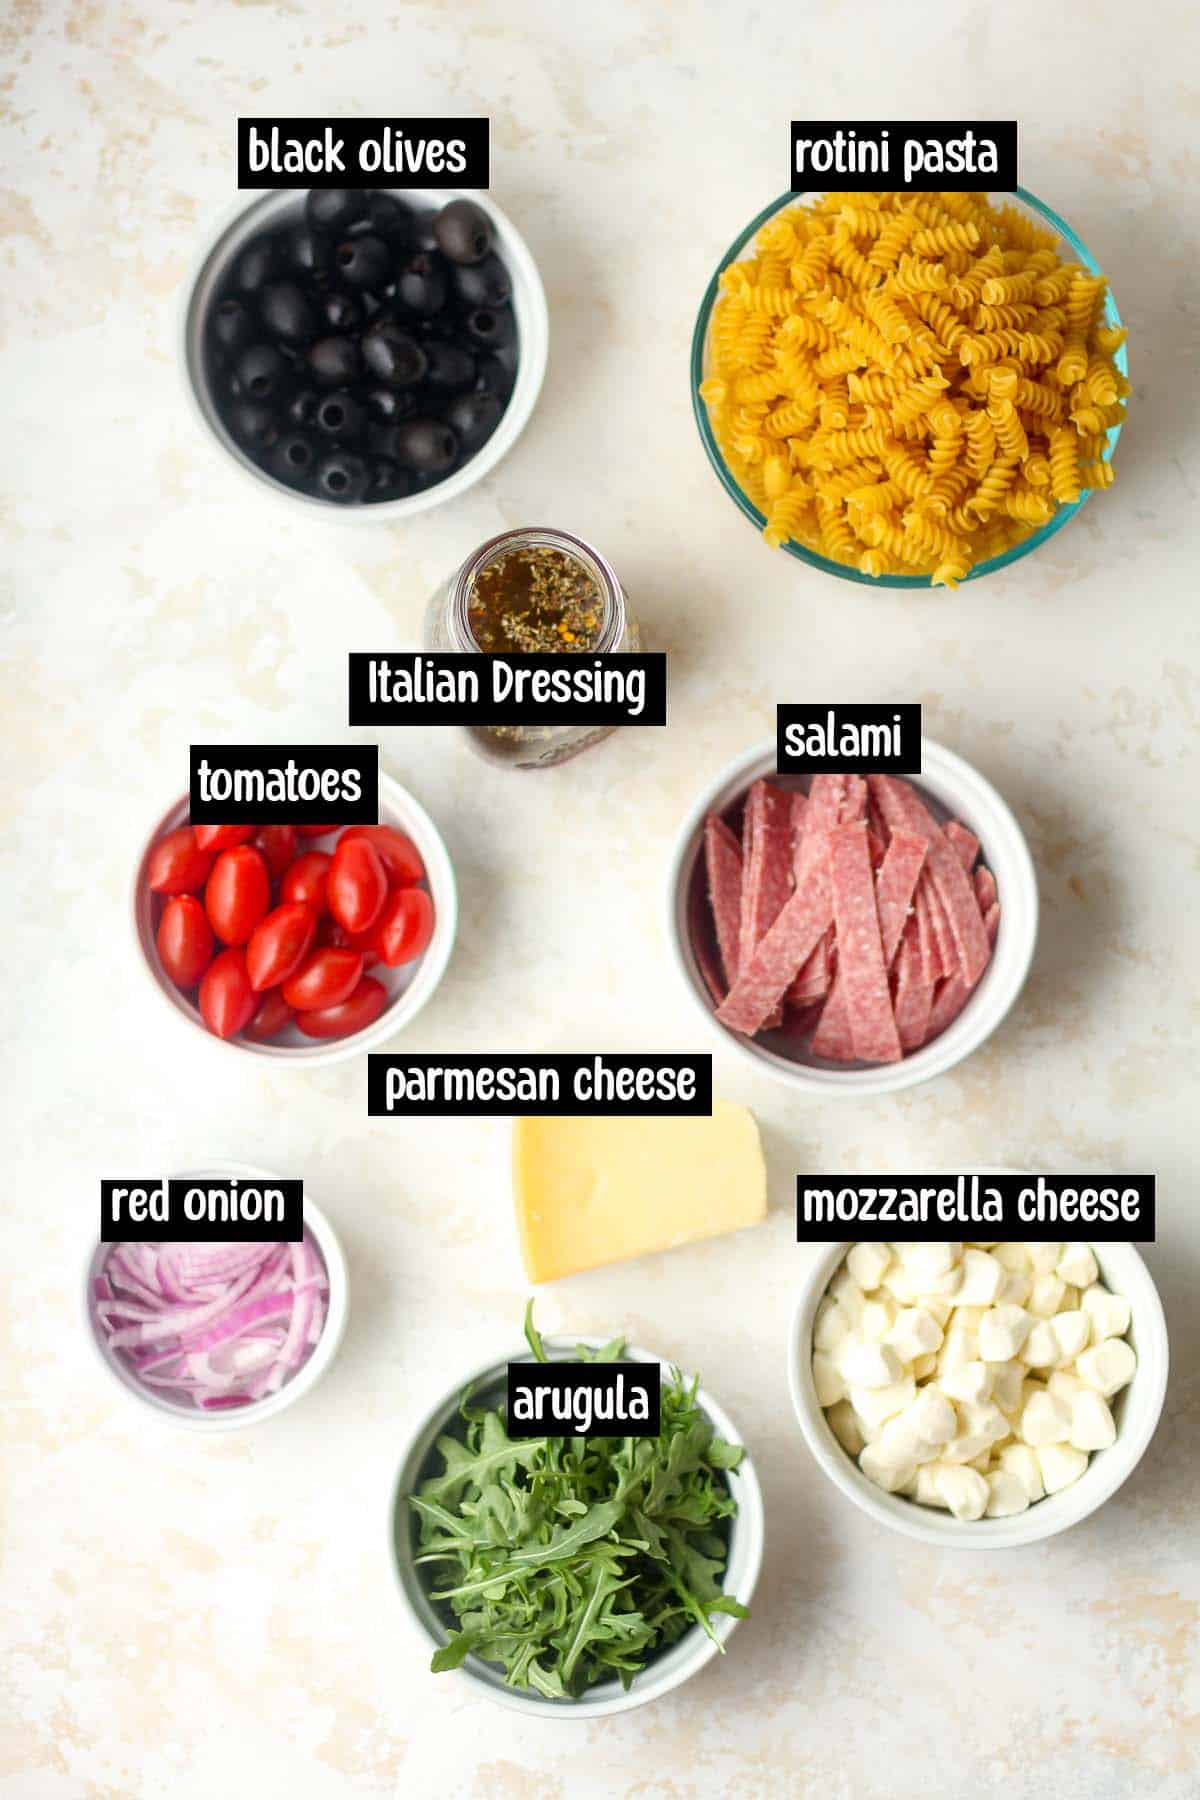 The ingredients (labeled) for the pasta salad.